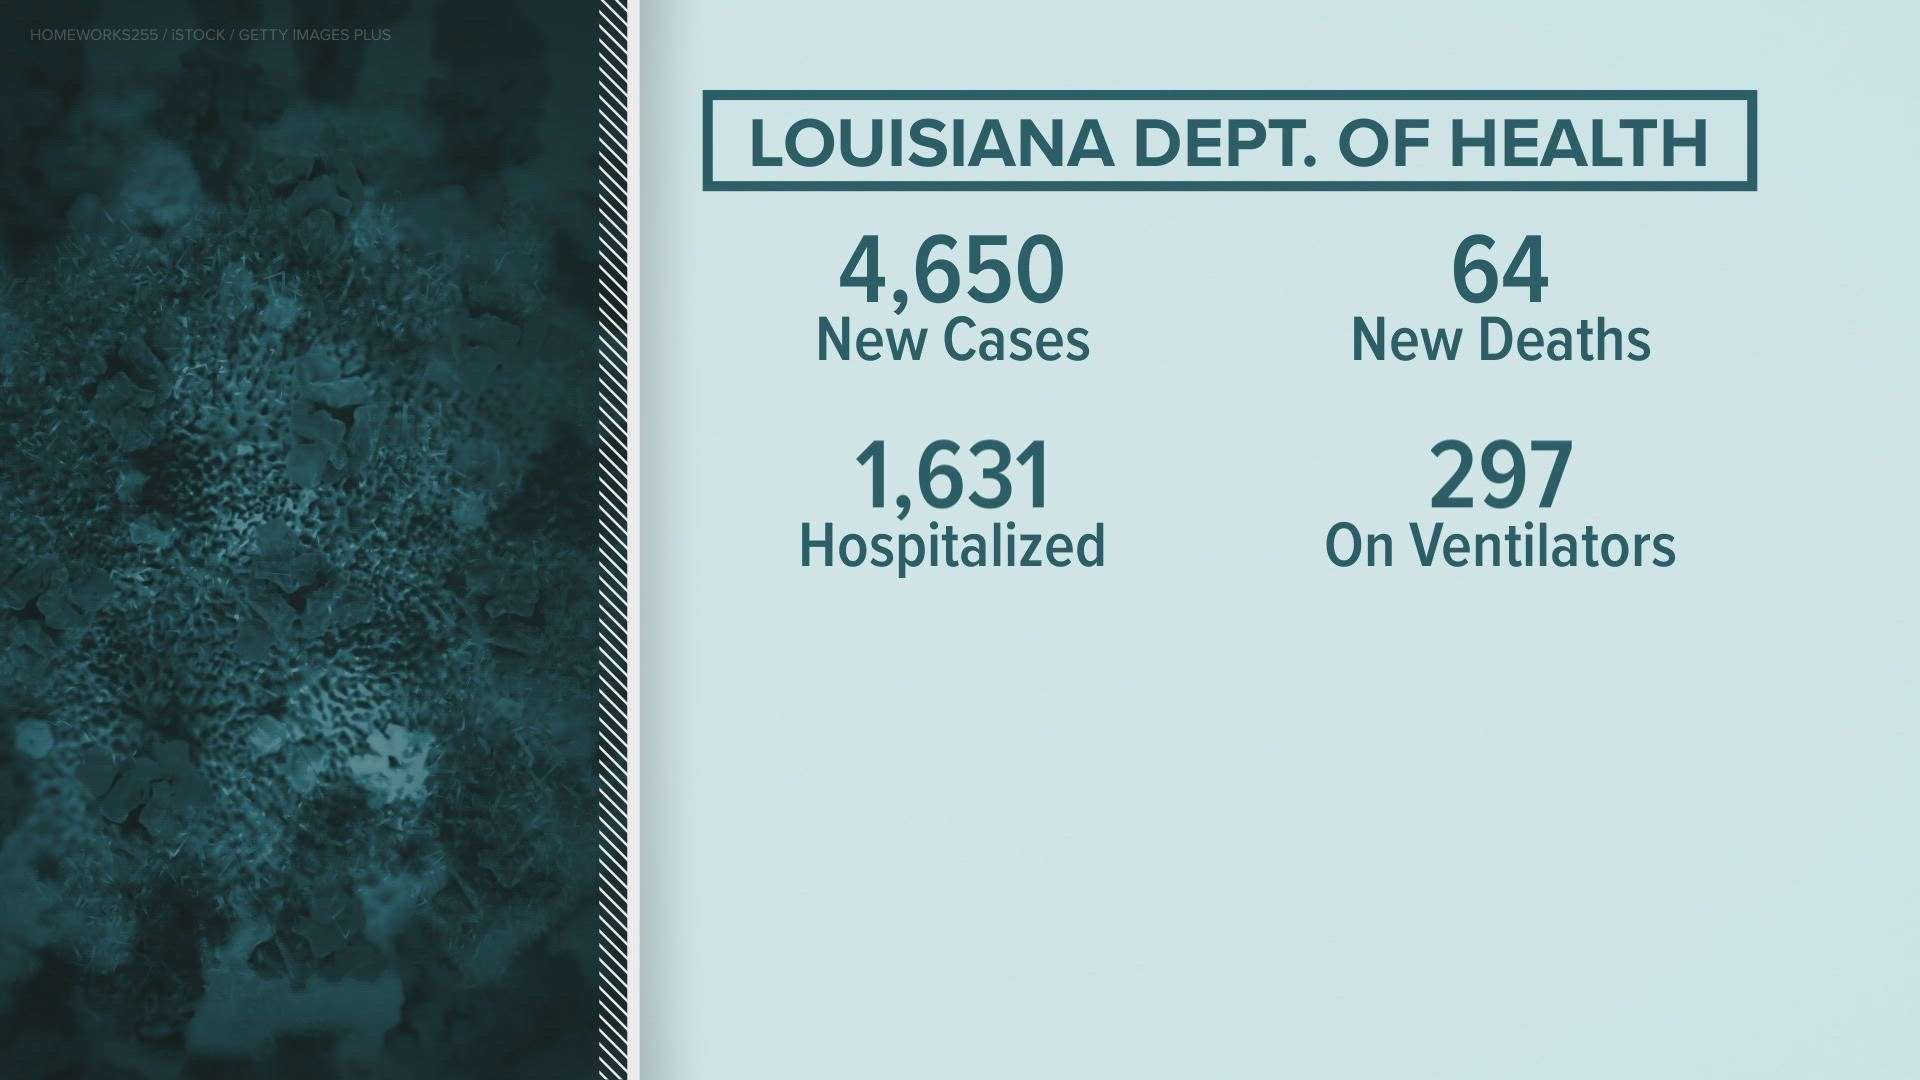 Louisiana's COVID numbers continued to improve, with hospitalizations falling to about 1,600.